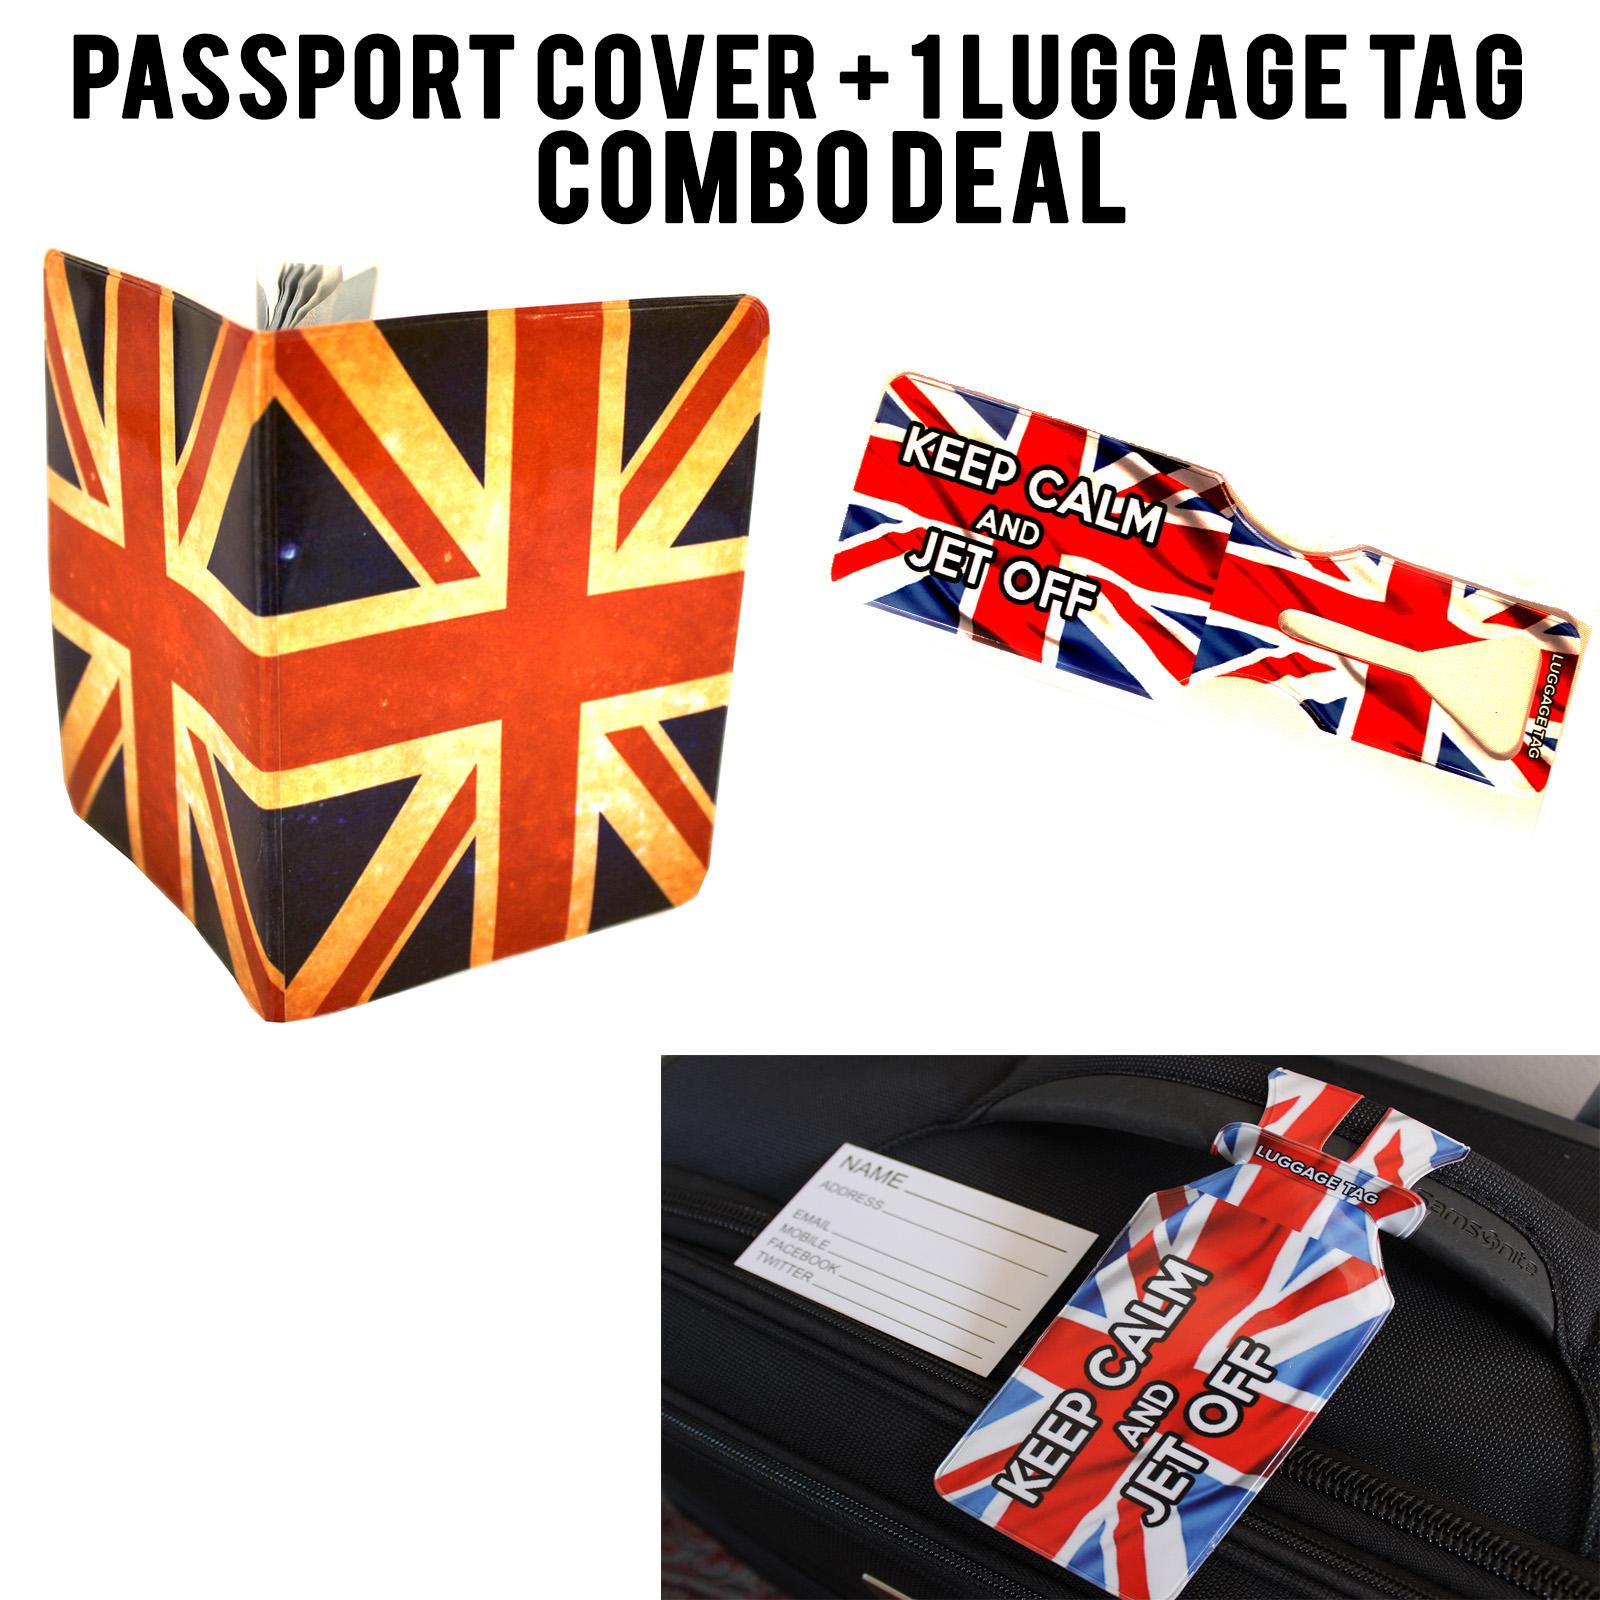 Union Jack Vintage and Keep Calm Union Jack Passport Cover and Luggage Tag Set